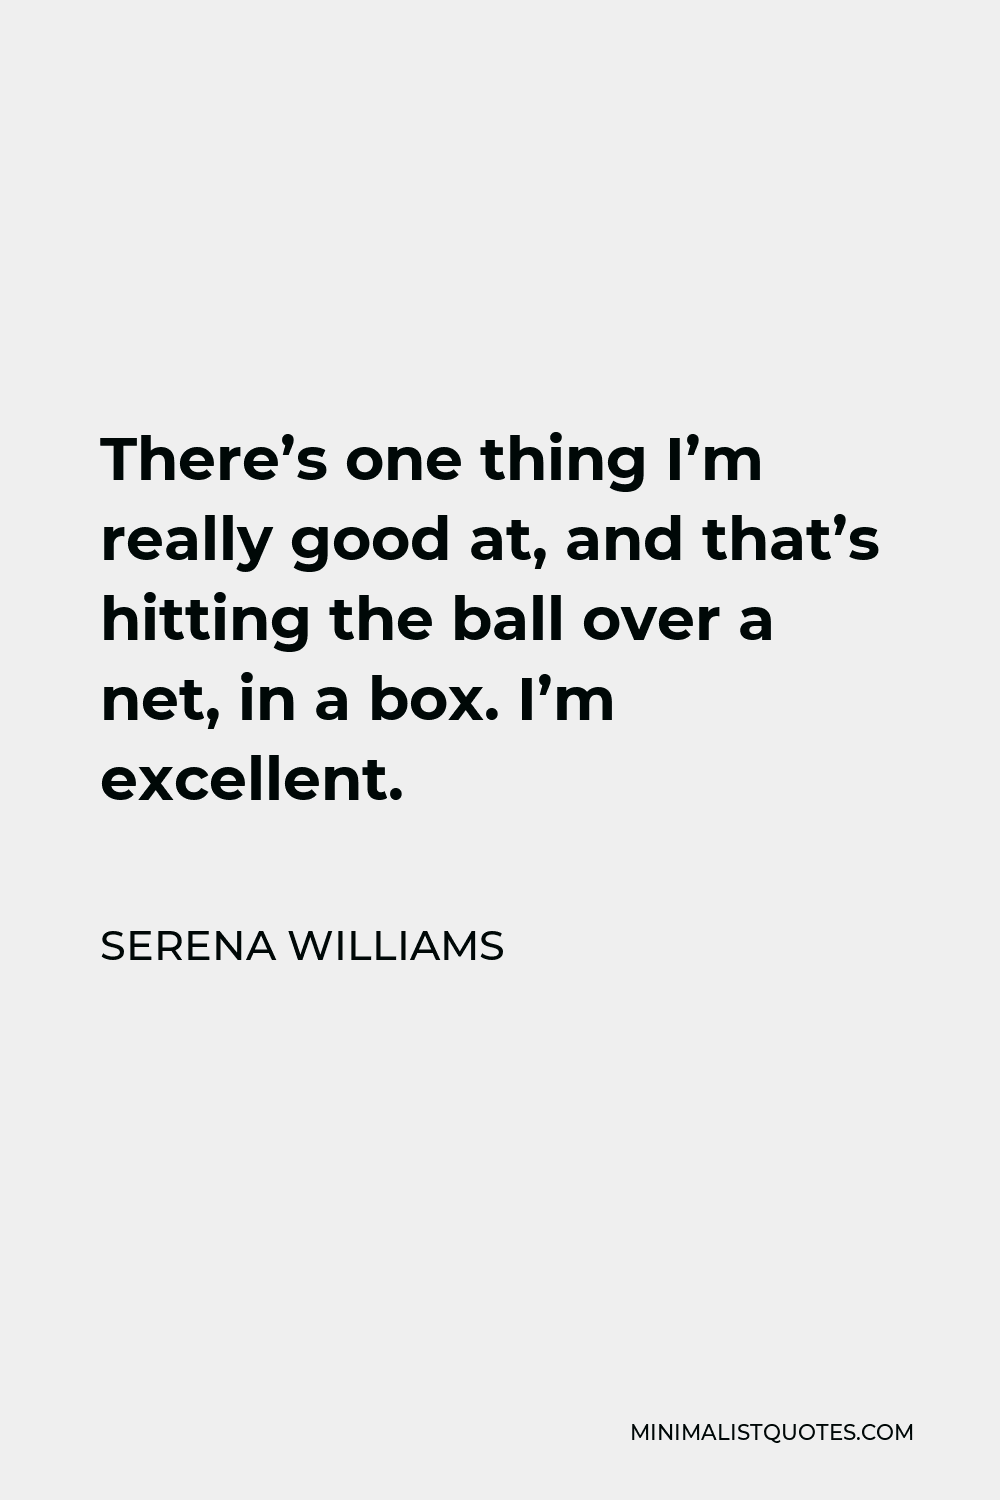 Serena Williams Quote - There’s one thing I’m really good at, and that’s hitting the ball over a net, in a box. I’m excellent.